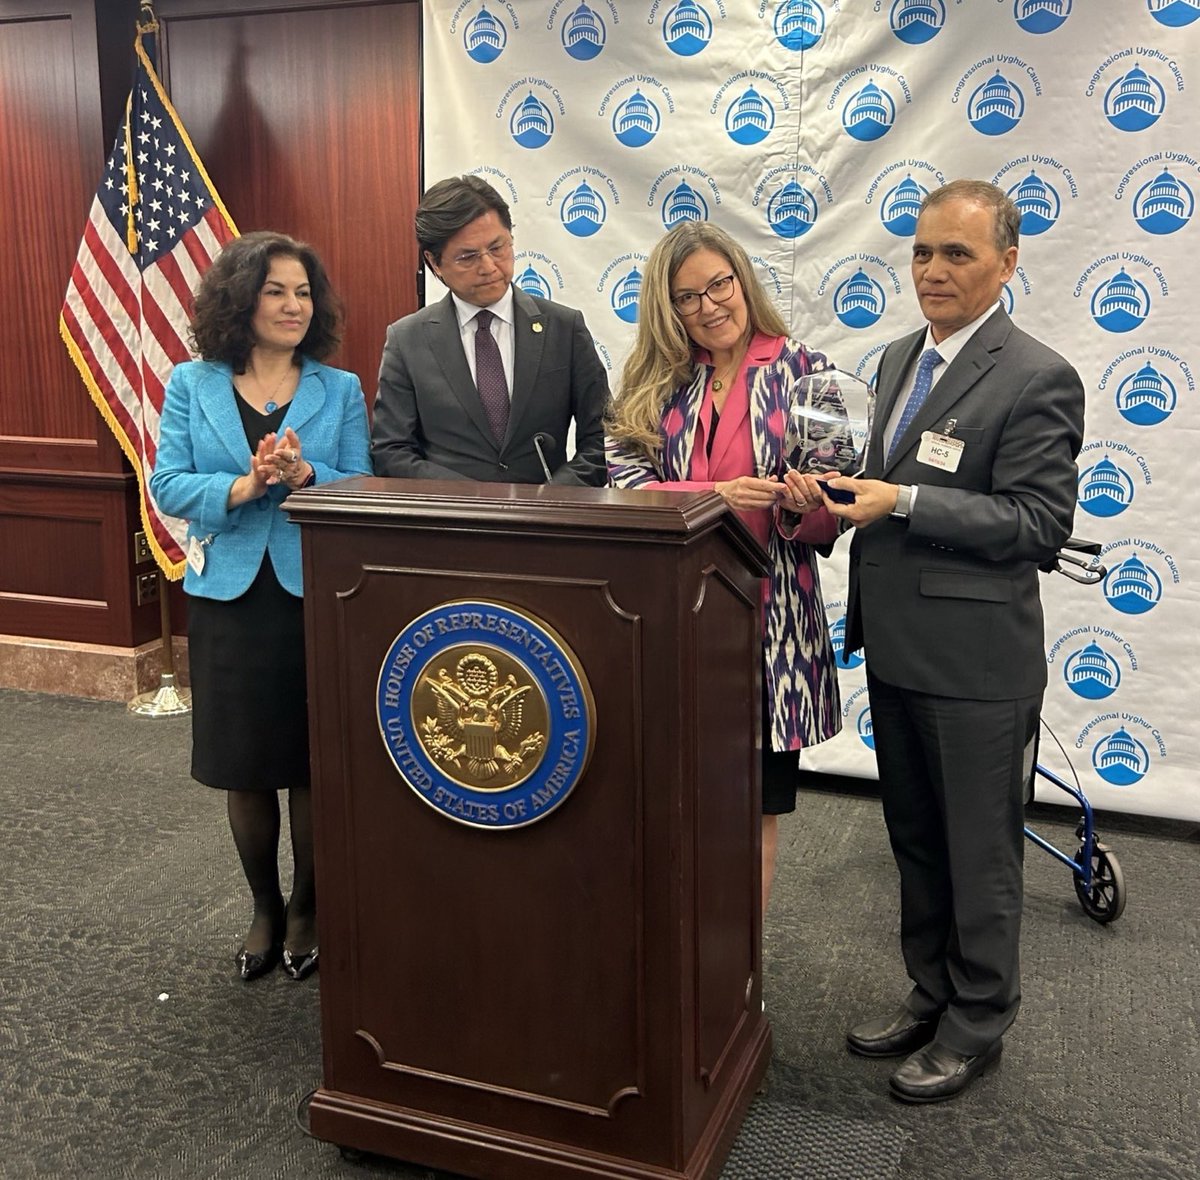 CFU was honored to be joined by @RepWexton at the Congressional Uyghur Caucus event! Rep. Wexton represents Virginia's 10th congressional district, home to a sizable #Uyghur diaspora. In addressing the event she noted: 'I've made it an issue of top priority, including leading